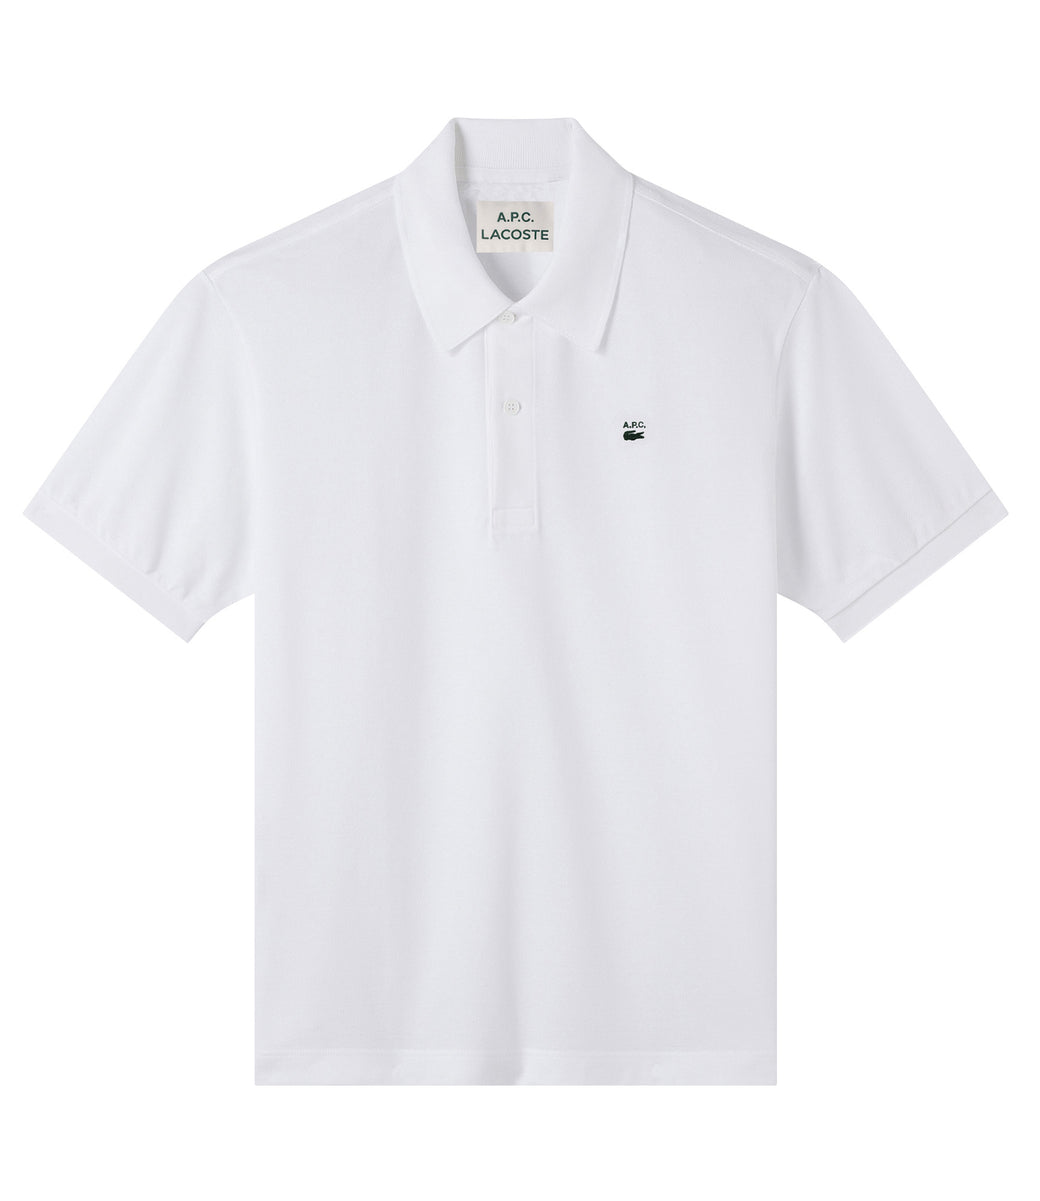 A.P.C. x Lacoste Polo Shirt White - SS22 メンズ - JP